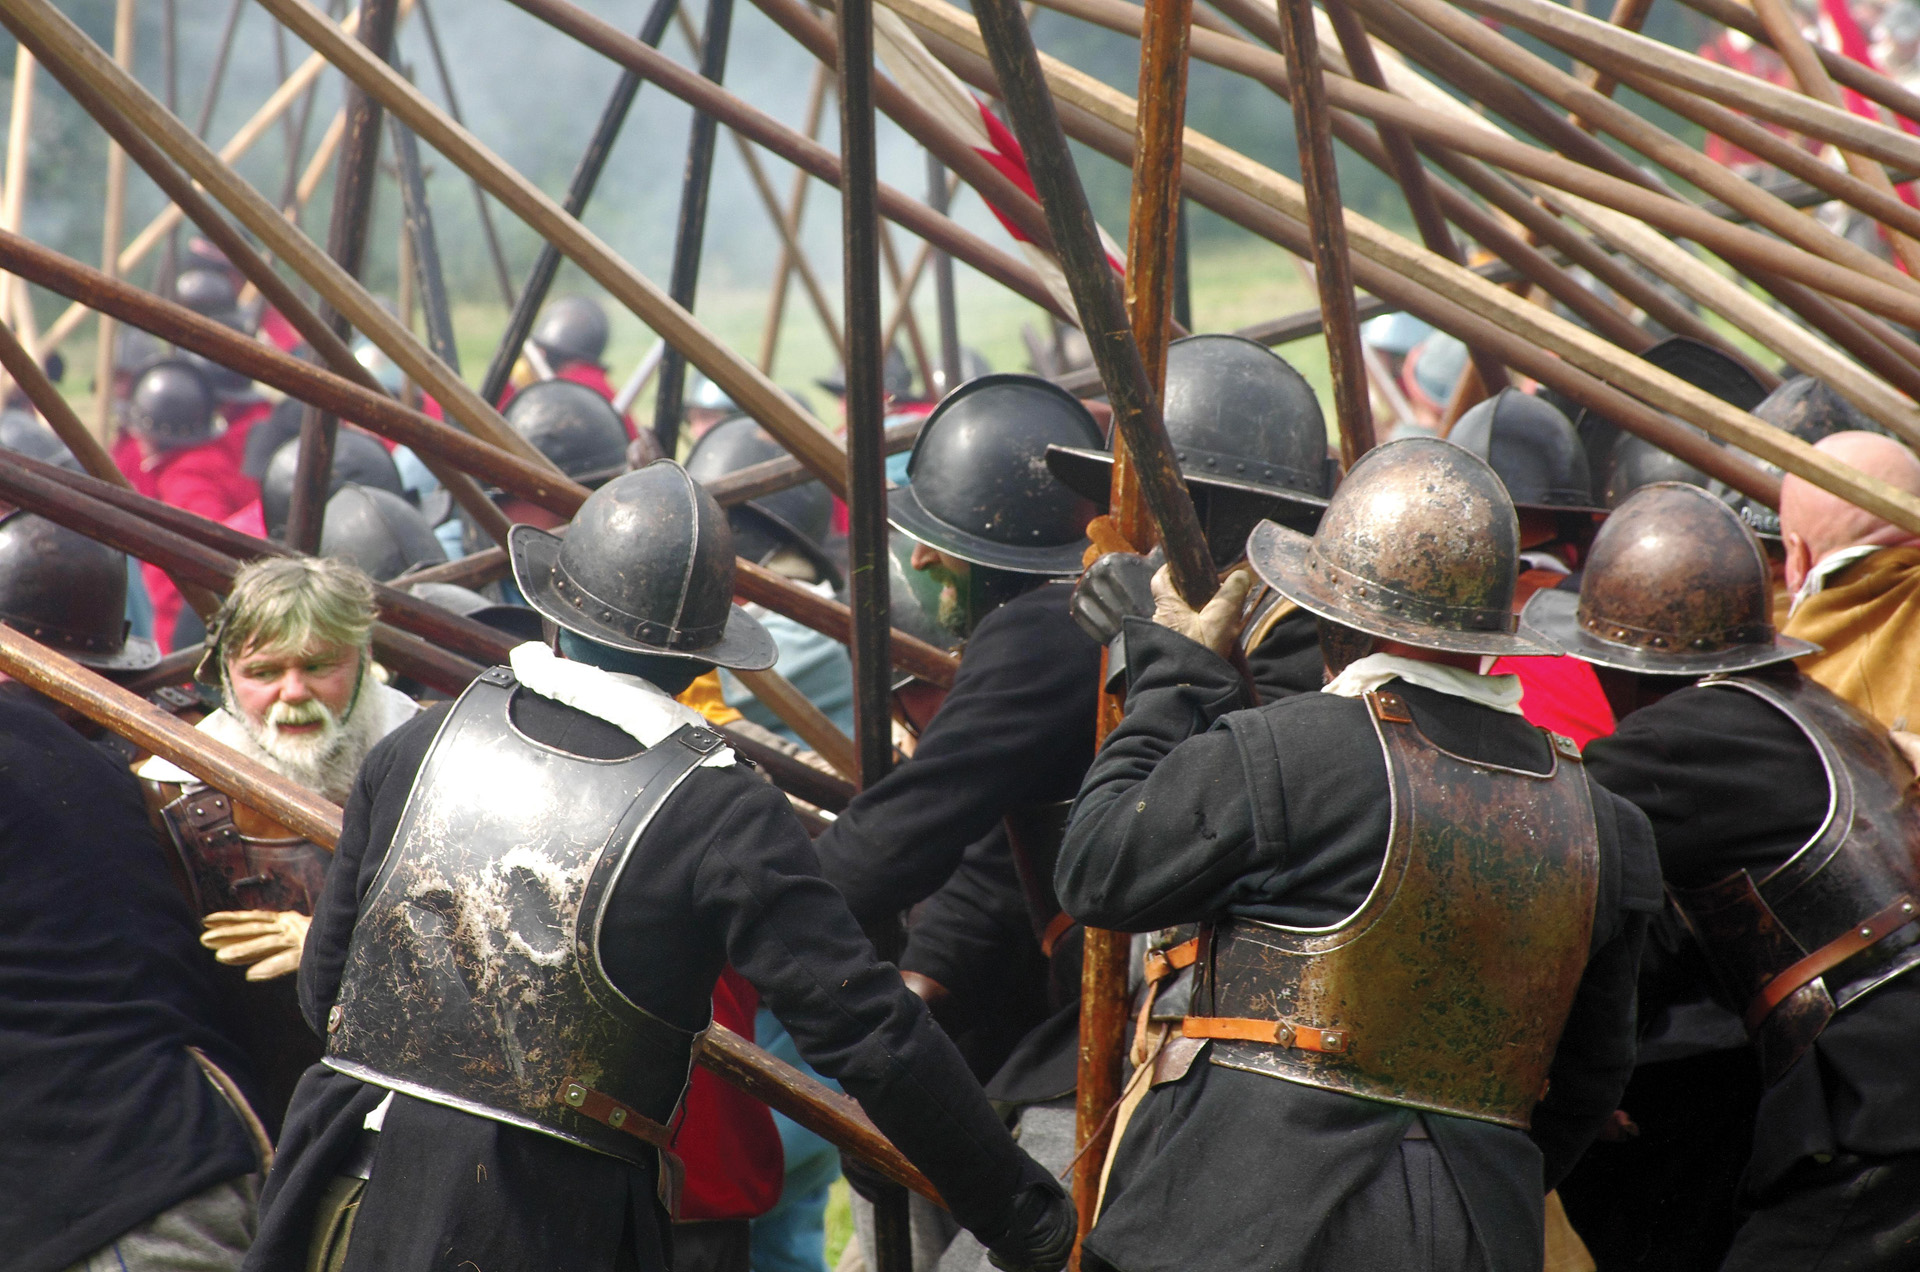 Pikemen participate in a re-enactment of the pitched battle. Parliamentary forces fought with great professionalism in a slugfest marked by heavy casualties on both sides.